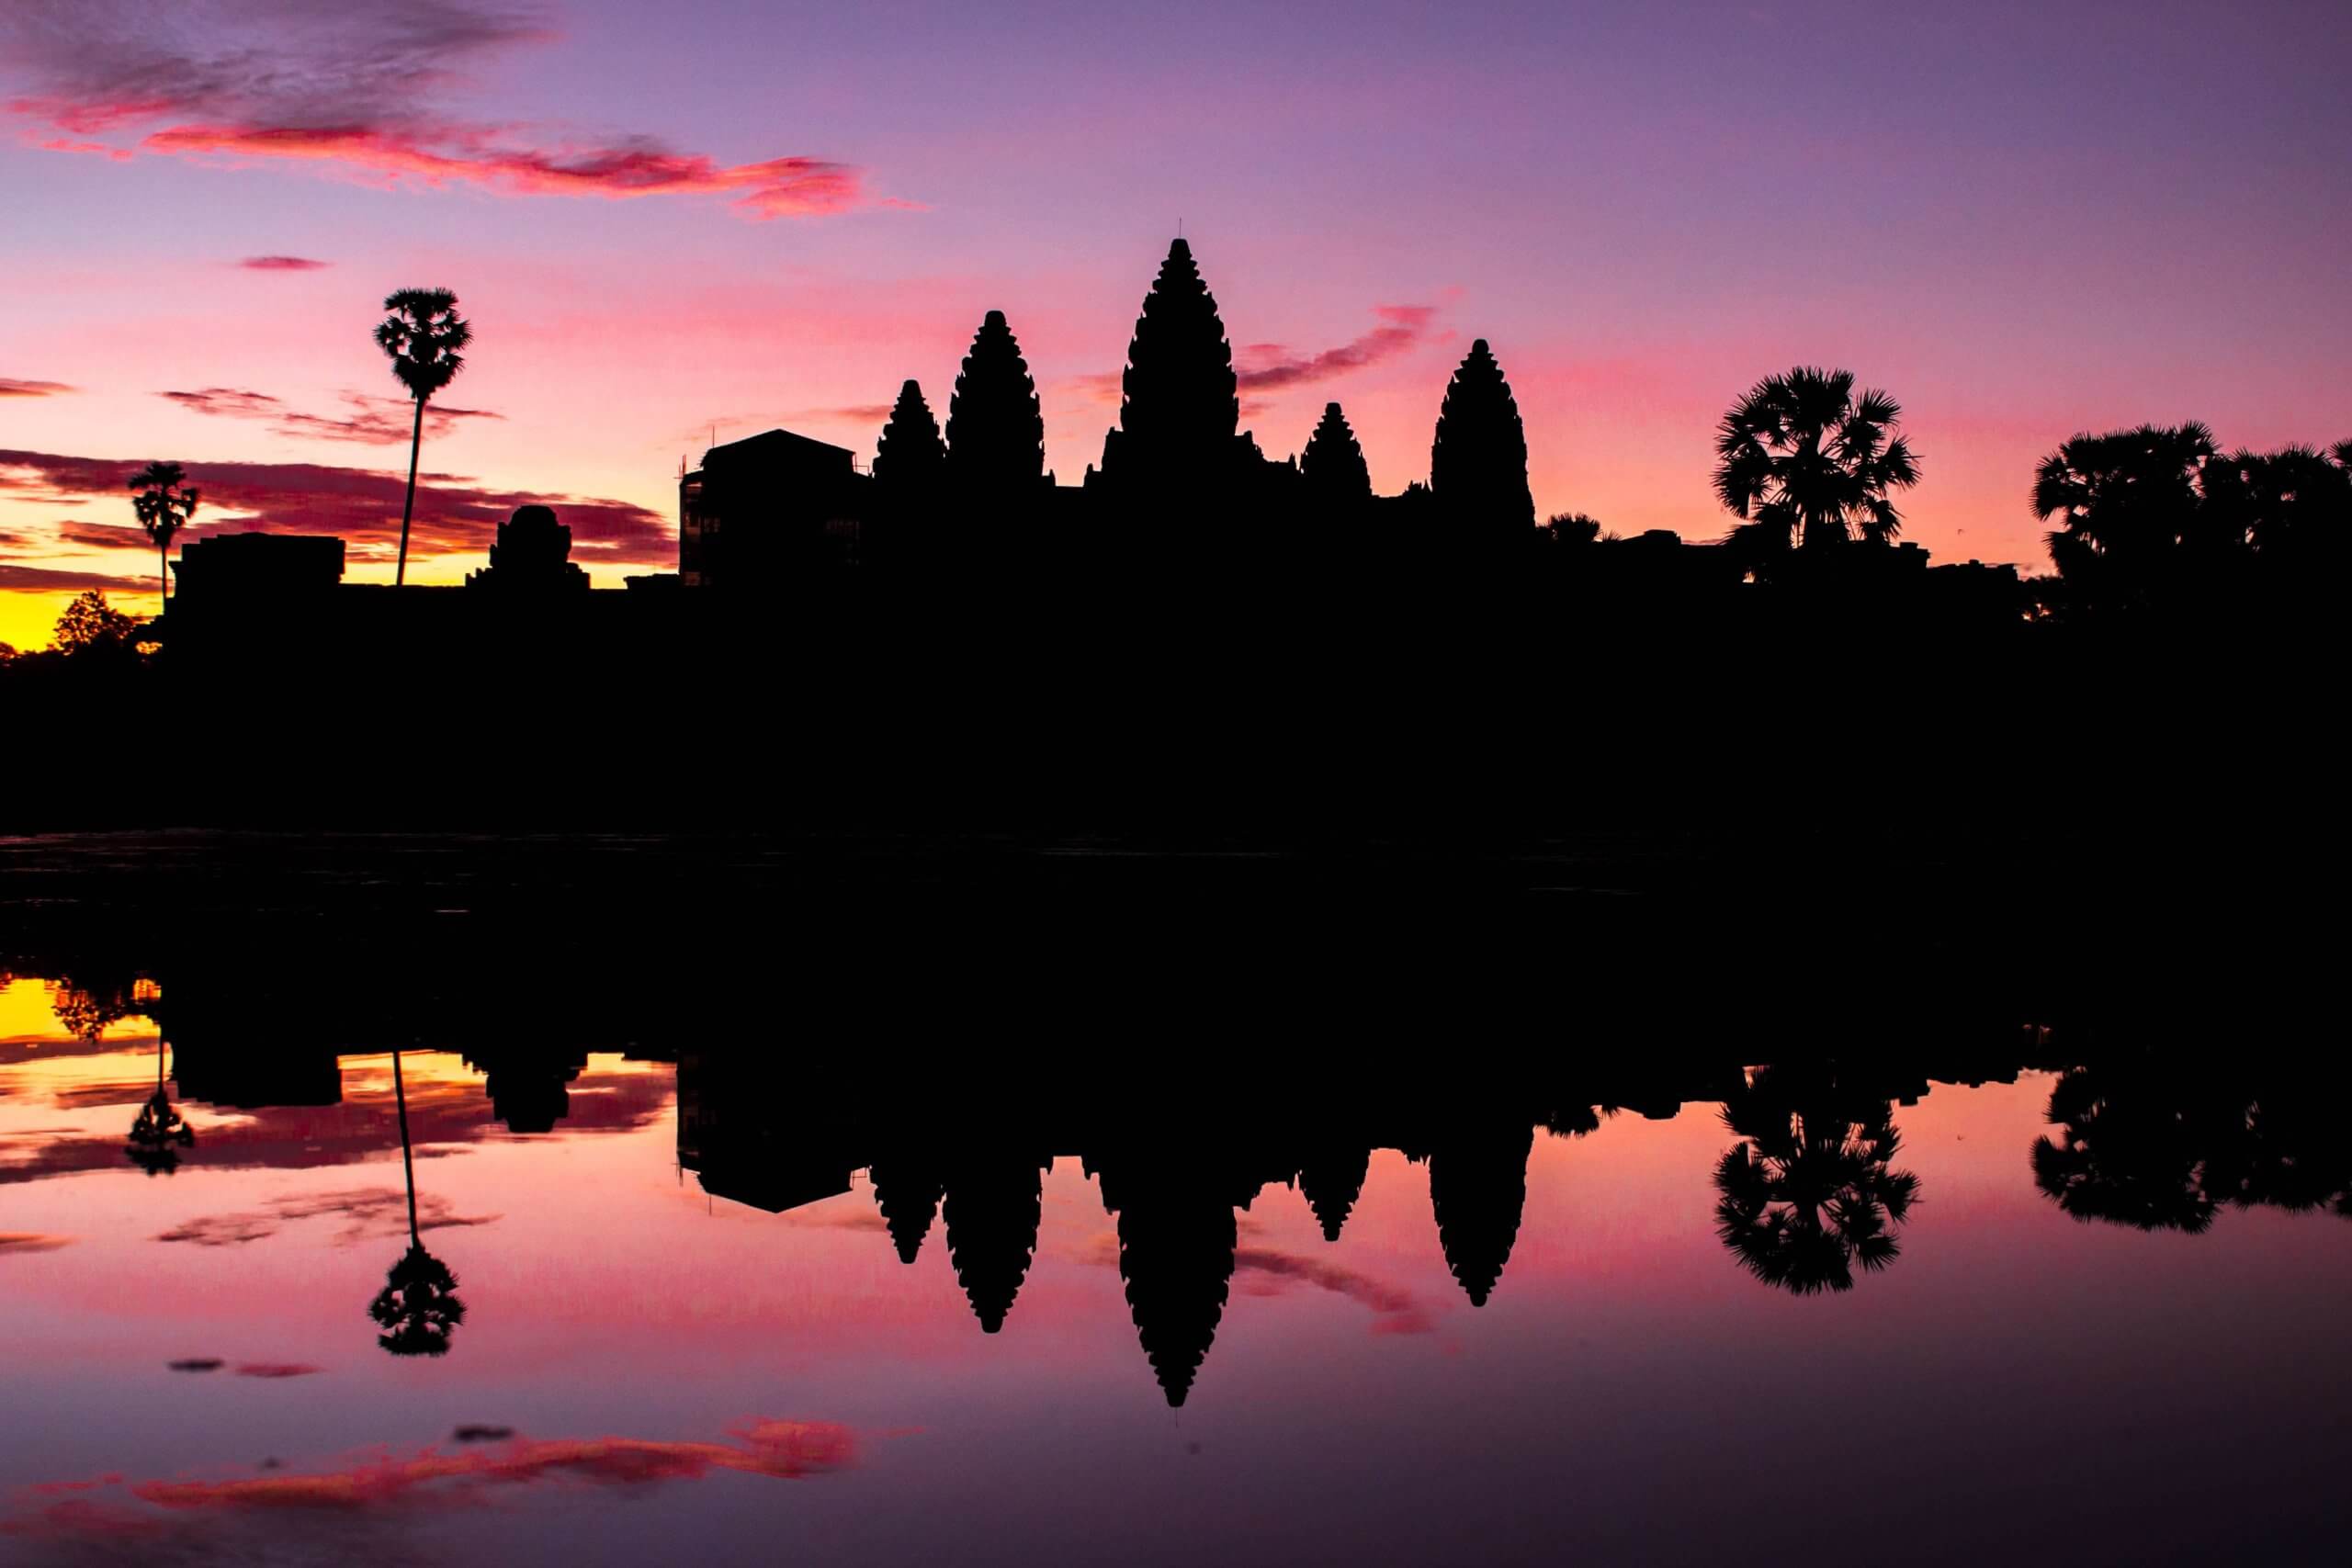 Toronto to Vietnam or Cambodia – $729 CAD roundtrip w/ China Southern Airlines